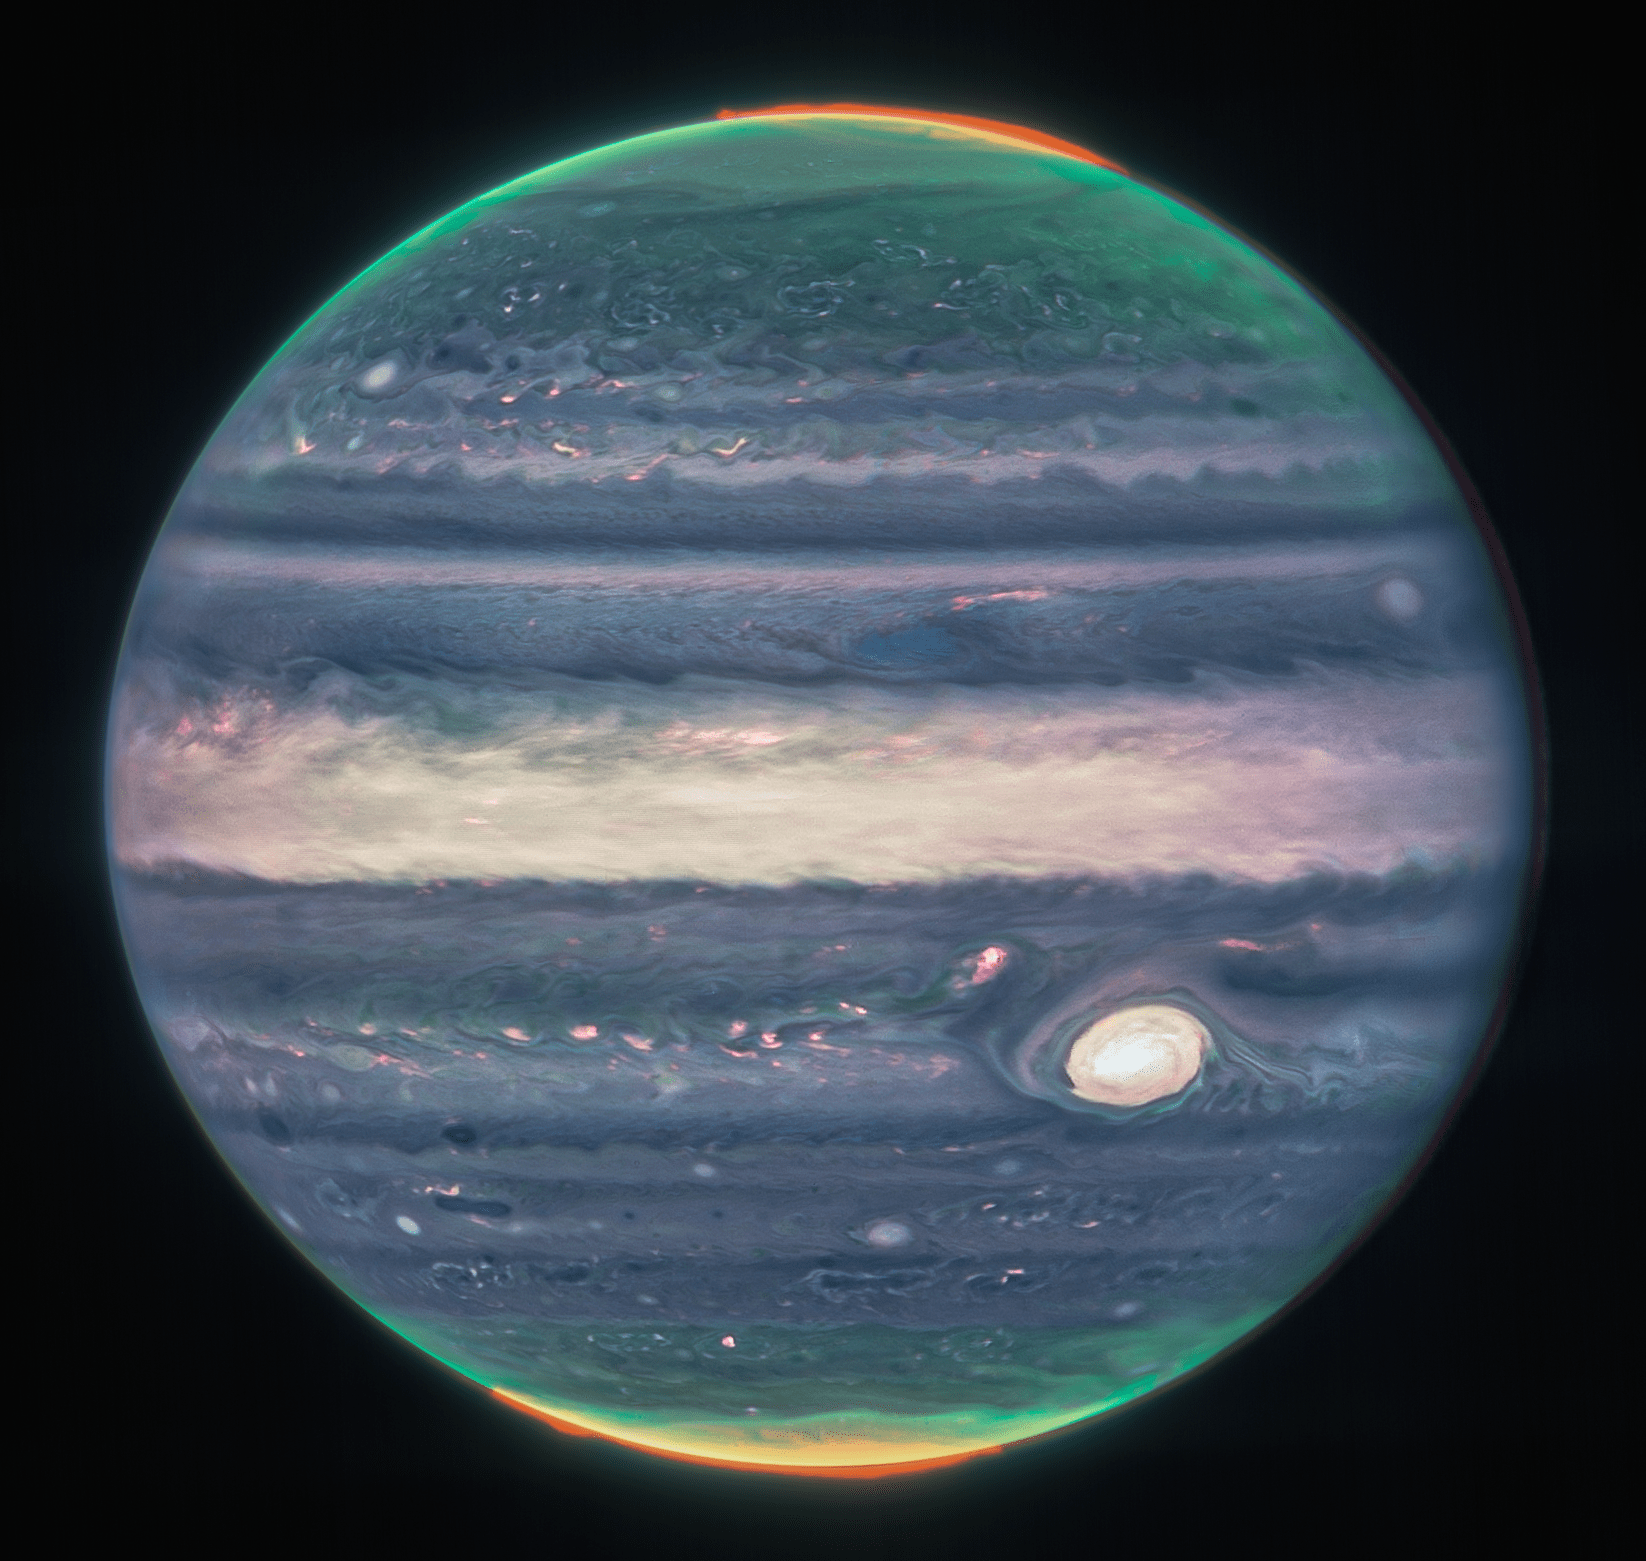 Jupiter dominates the black background of space. The planet is striated with swirling horizontal stripes of neon turquoise, periwinkle, light pink, and cream. The stripes interact and mix at their edges like cream in coffee. Along both of the poles, the planet glows in turquoise. Bright orange auroras glow just above the planet’s surface at both poles.